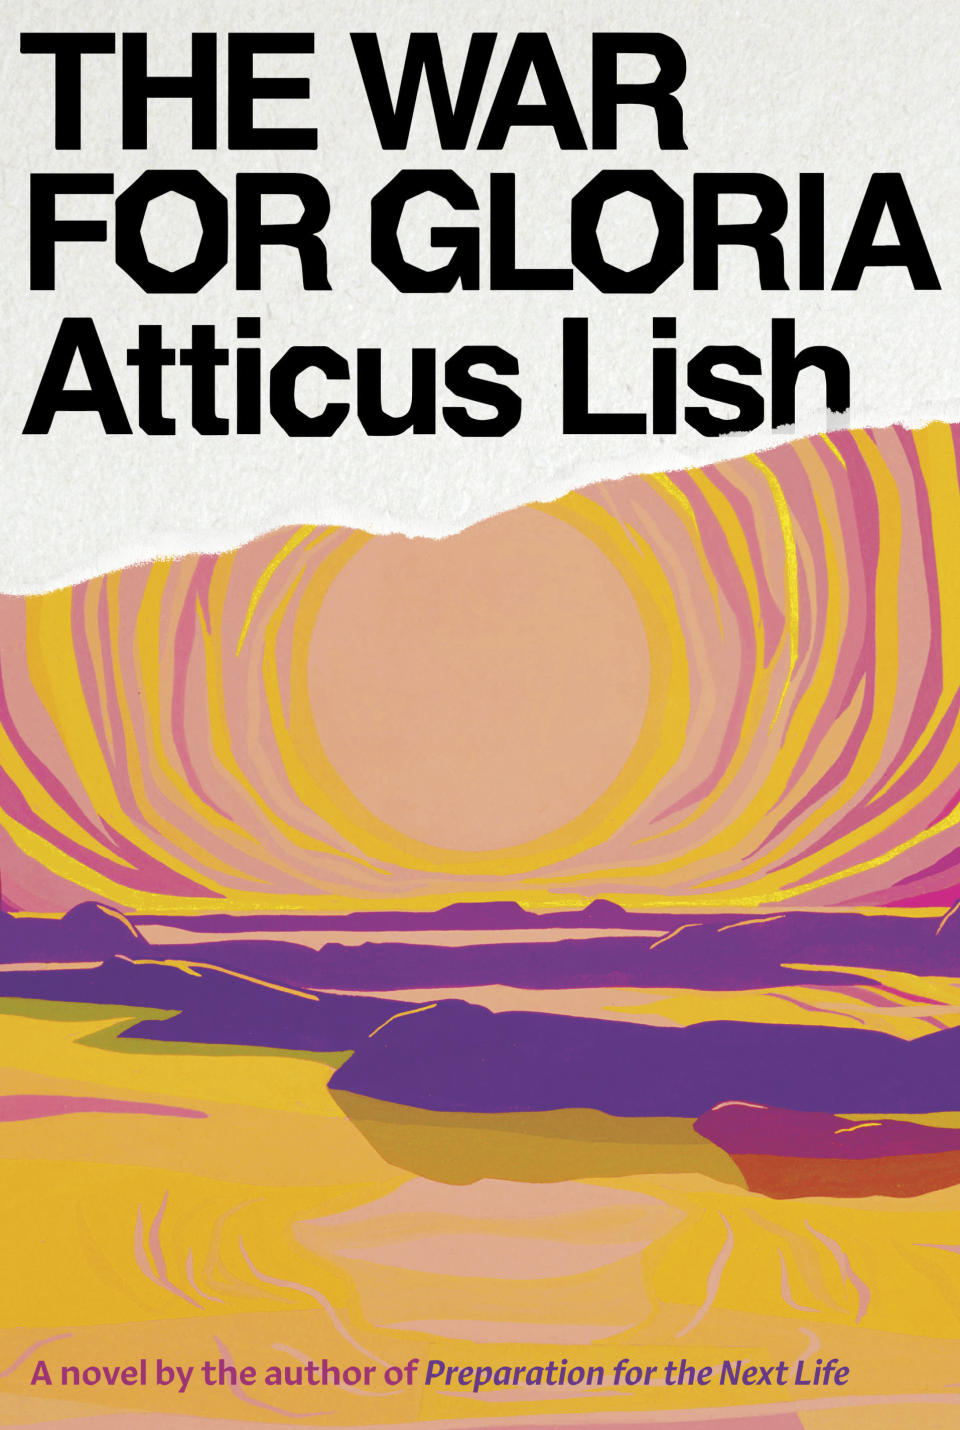 This cover image released by Knopf shows "The War for Gloria," a novel by Atticus Lish, releasing Sept. 7. (Knopf via AP)